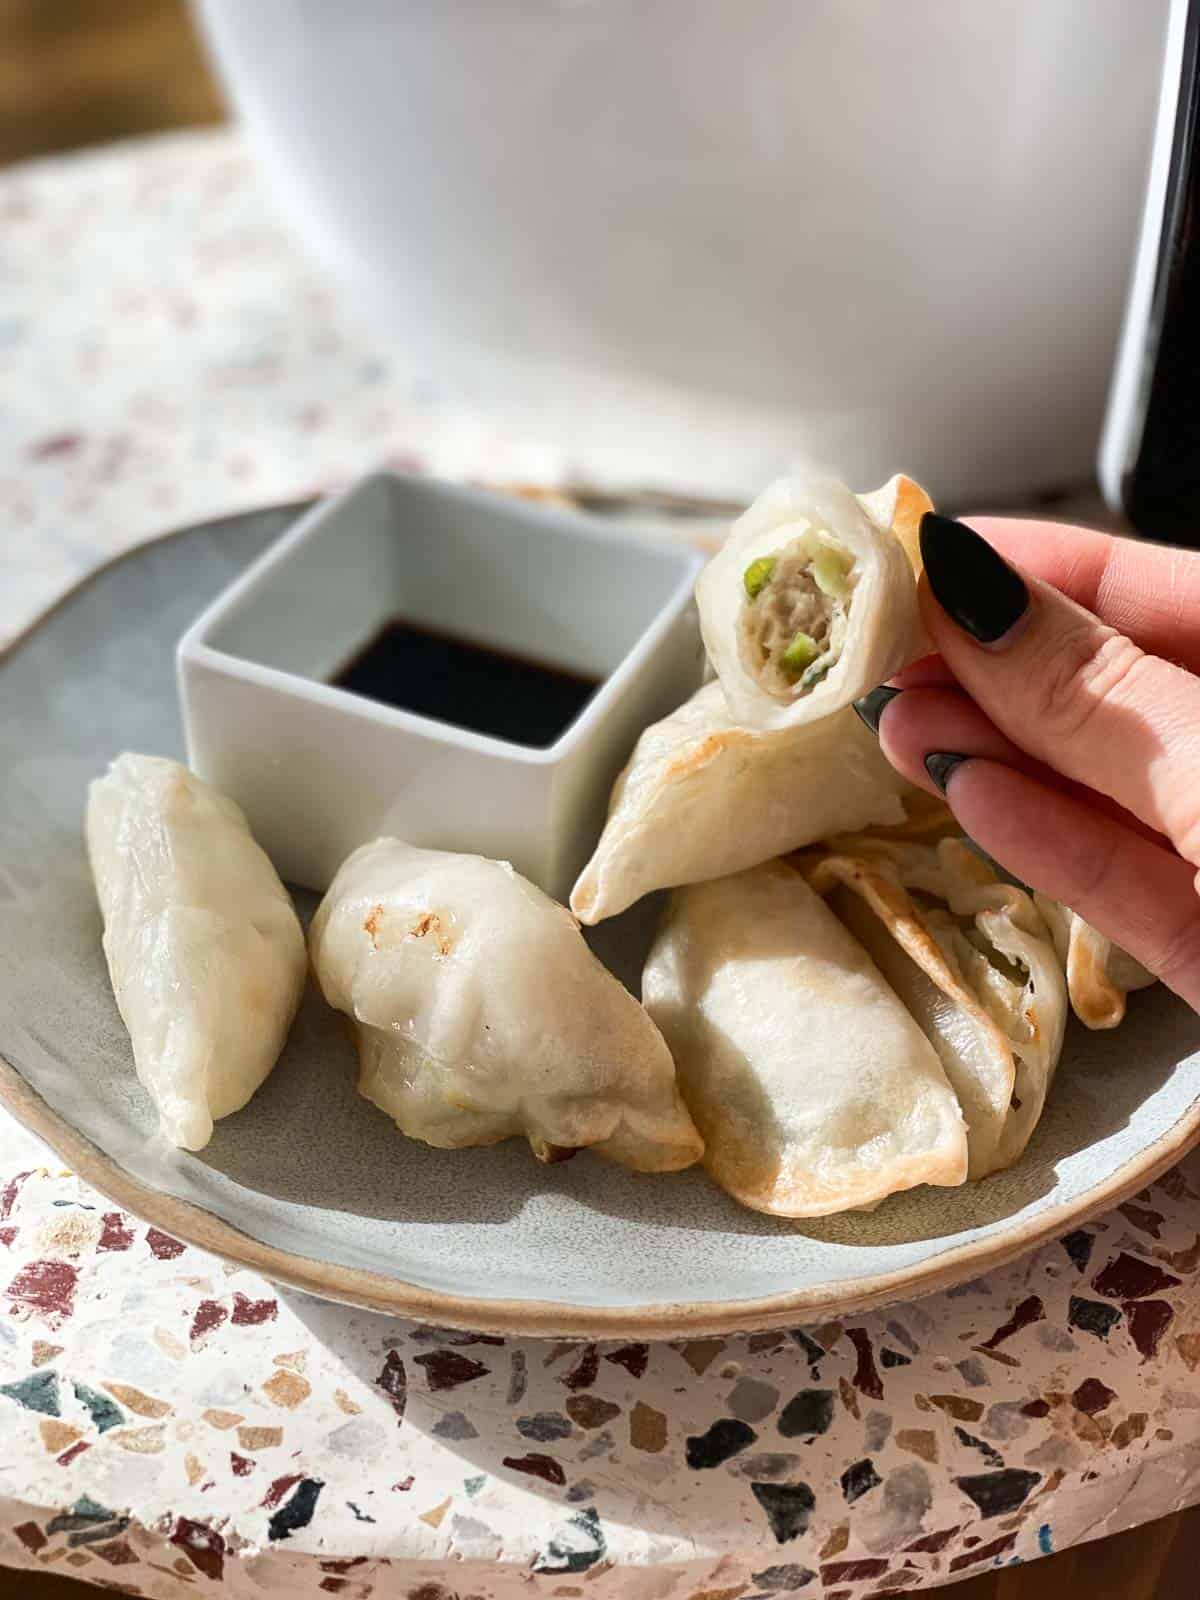 Hand holding partially eaten potsticker with plate of potstickers and sauce in the background